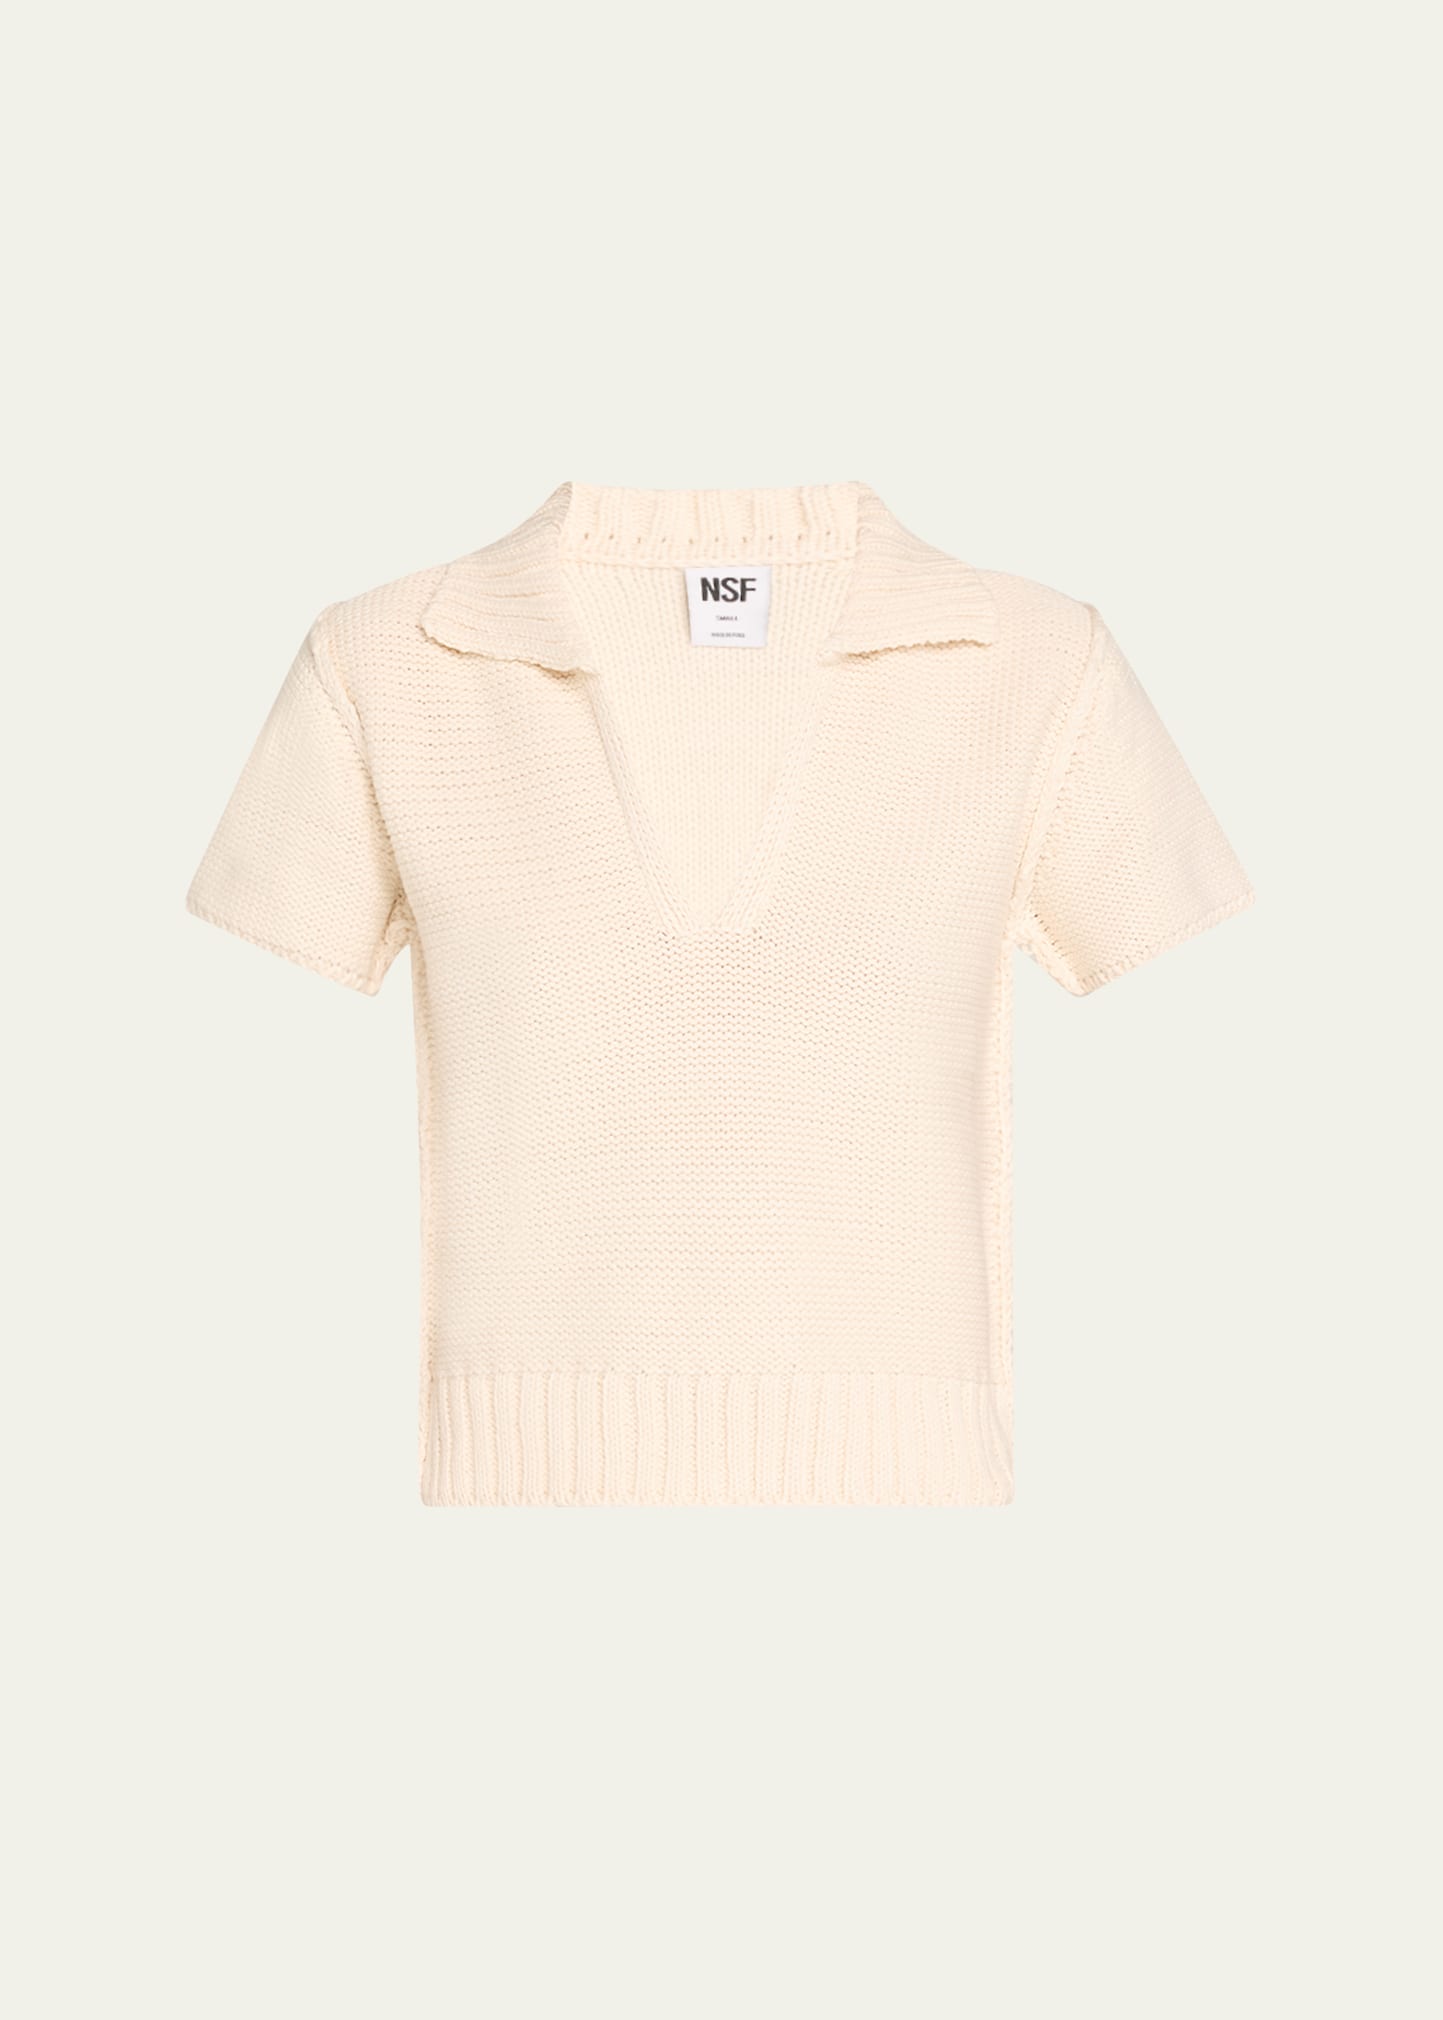 Sage Short-Sleeve Cotton Knit Polo Top